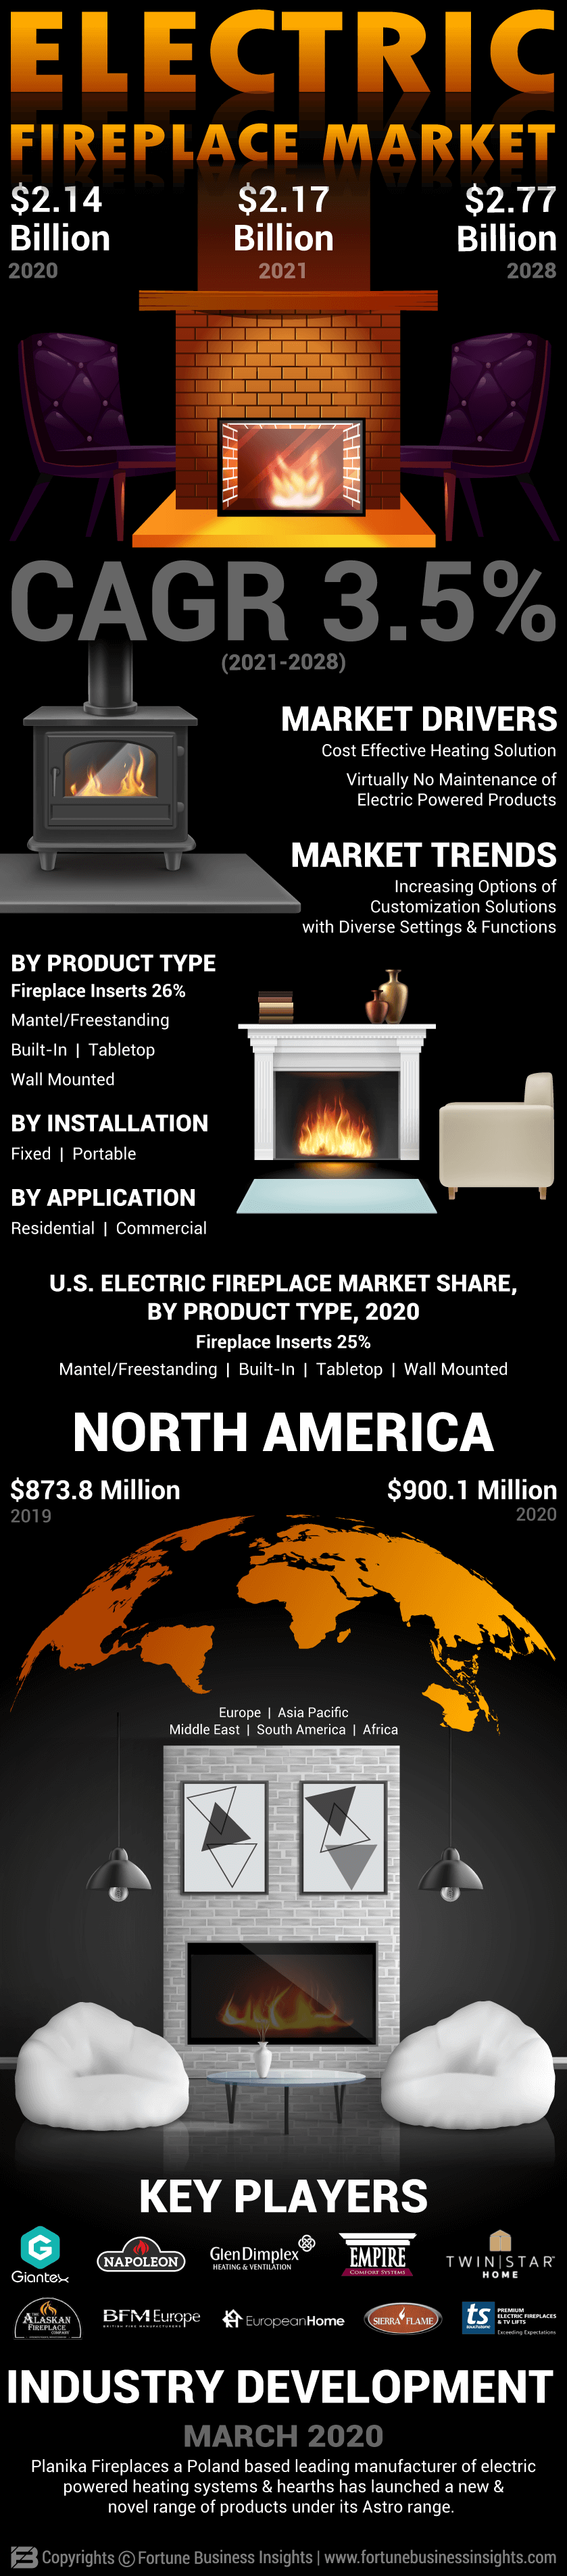 Electric Fireplace Market